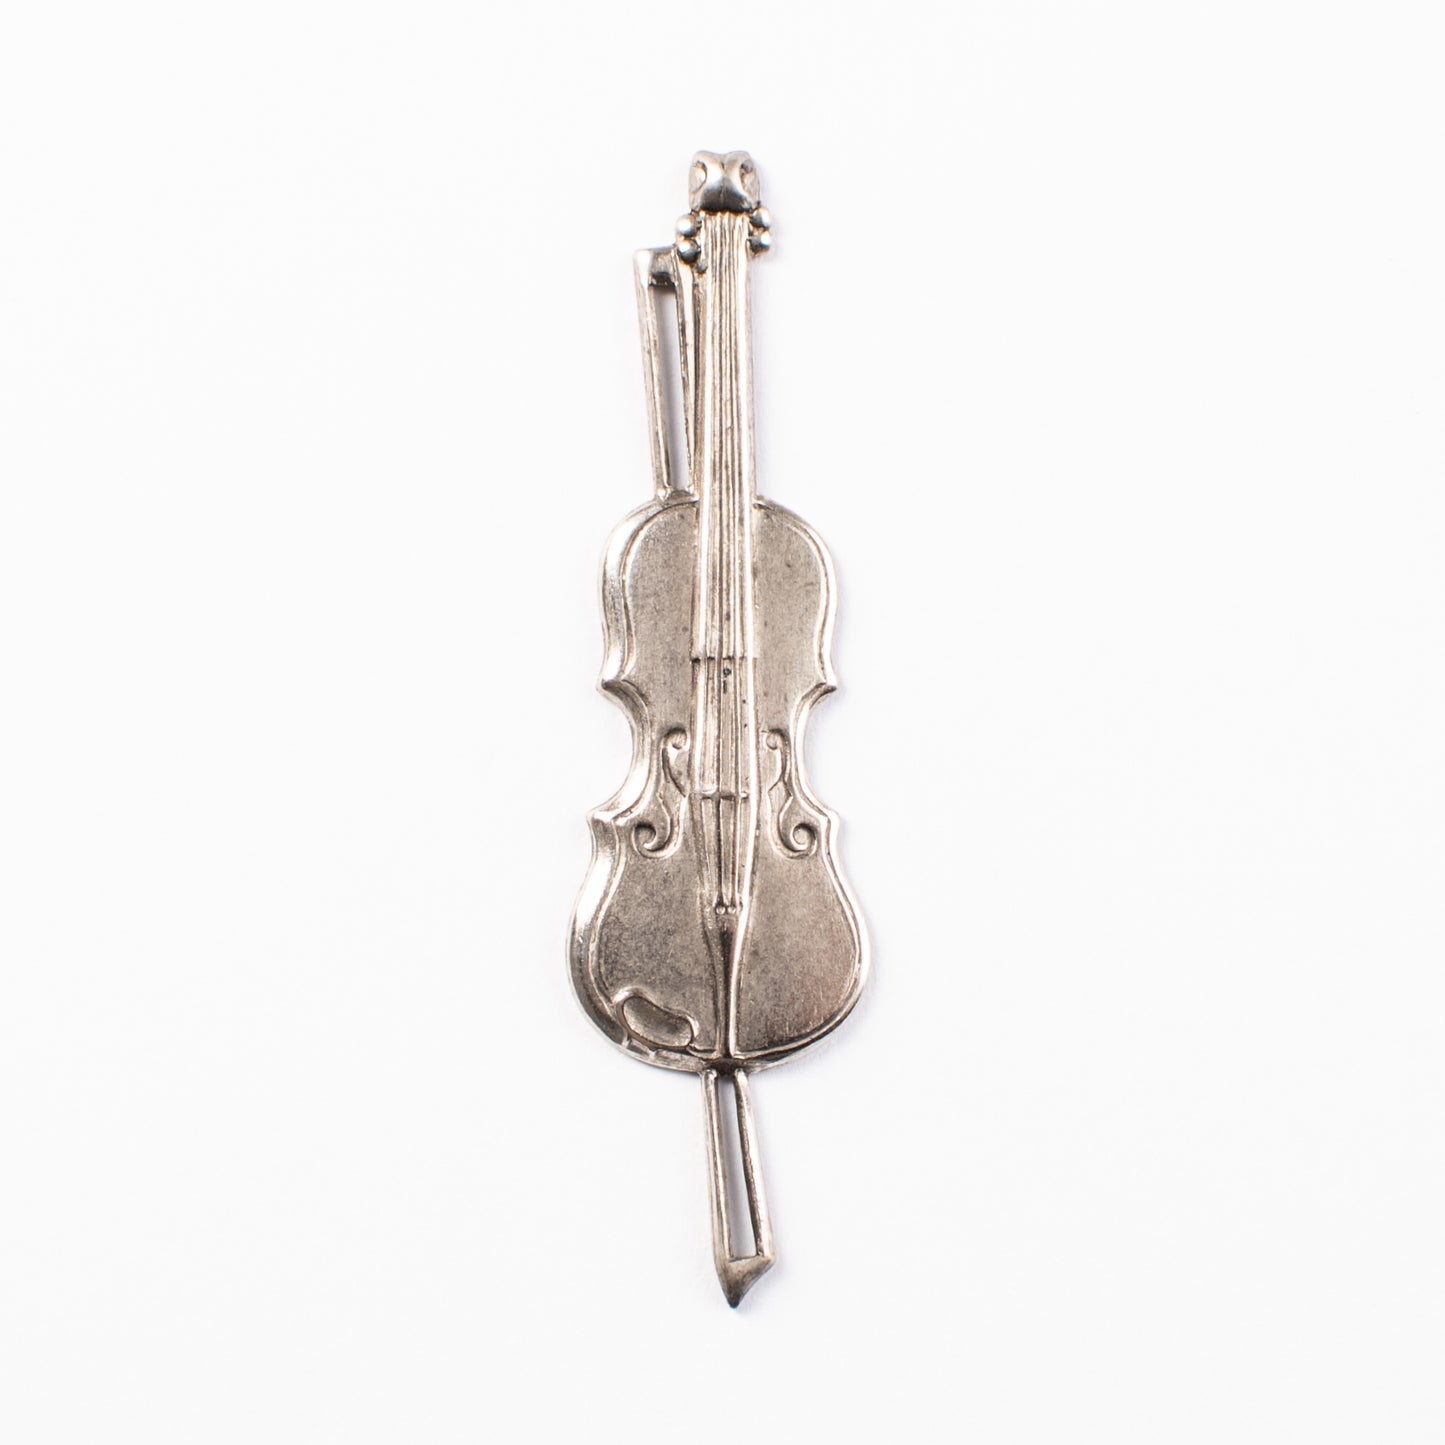 56mm Fiddle Violin Charm, Antique Gold, Antique Silver, pack of 3